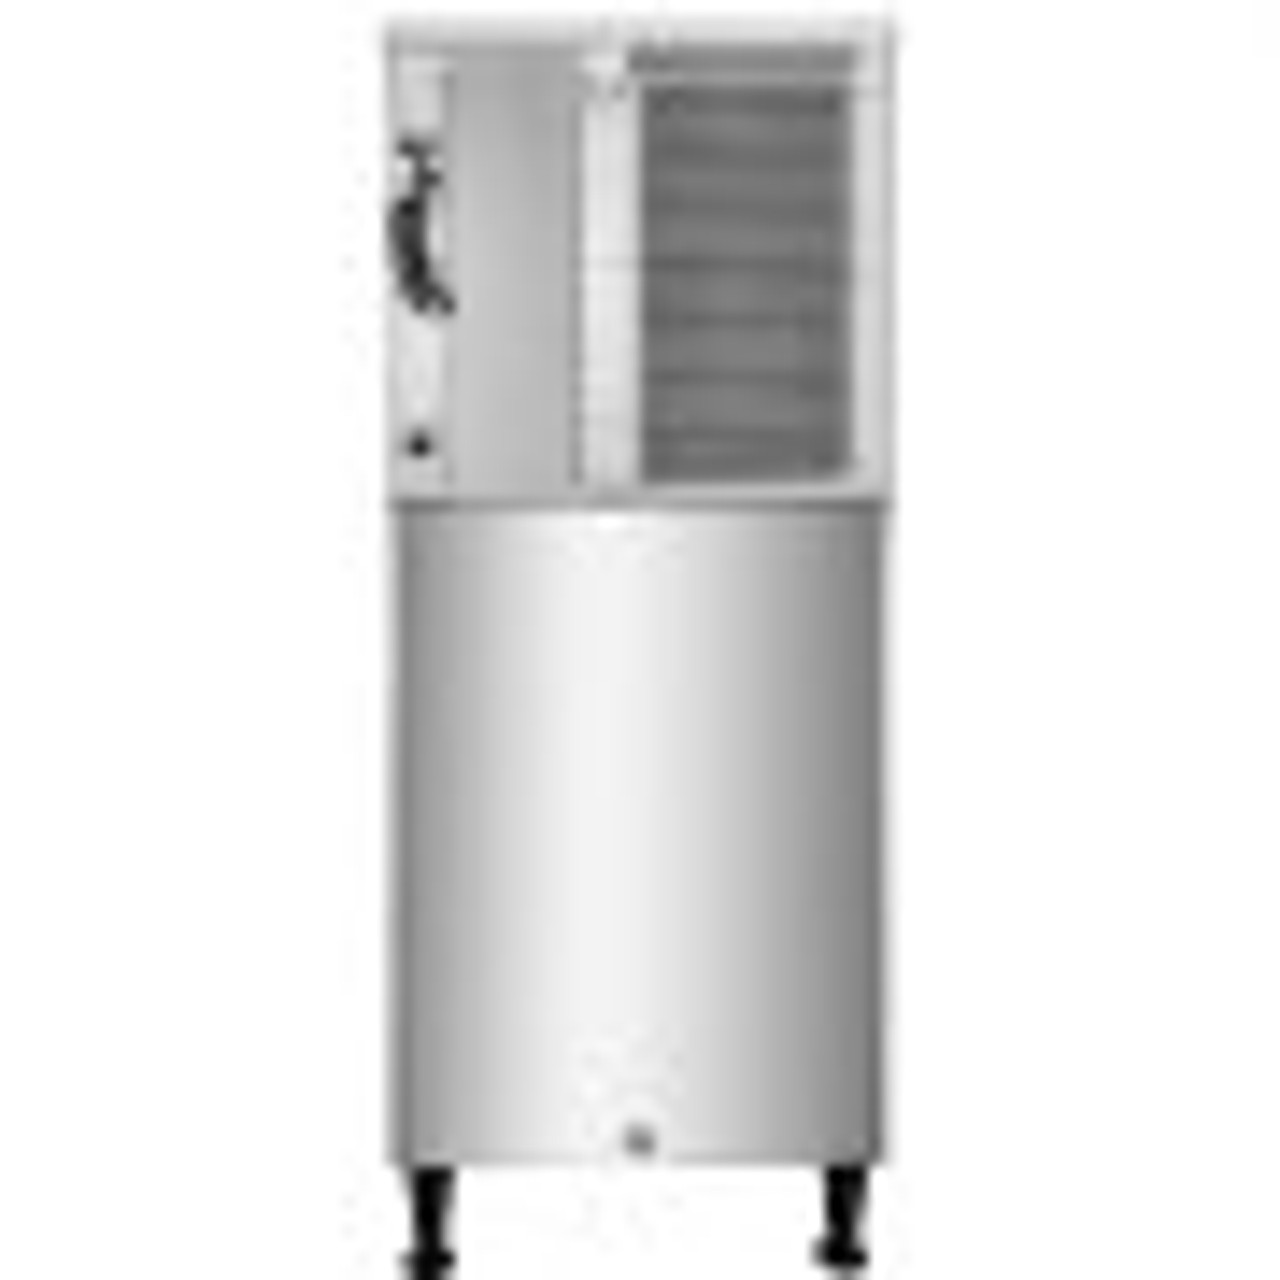 Flake Ice Machine 496 LBS/24 H Commercial Ice Machine Maker,Snowflake Ice Maker with 353 LBS Ice Storage Capacity, Commercial Snow Flake Ice Maker, with Water Filters